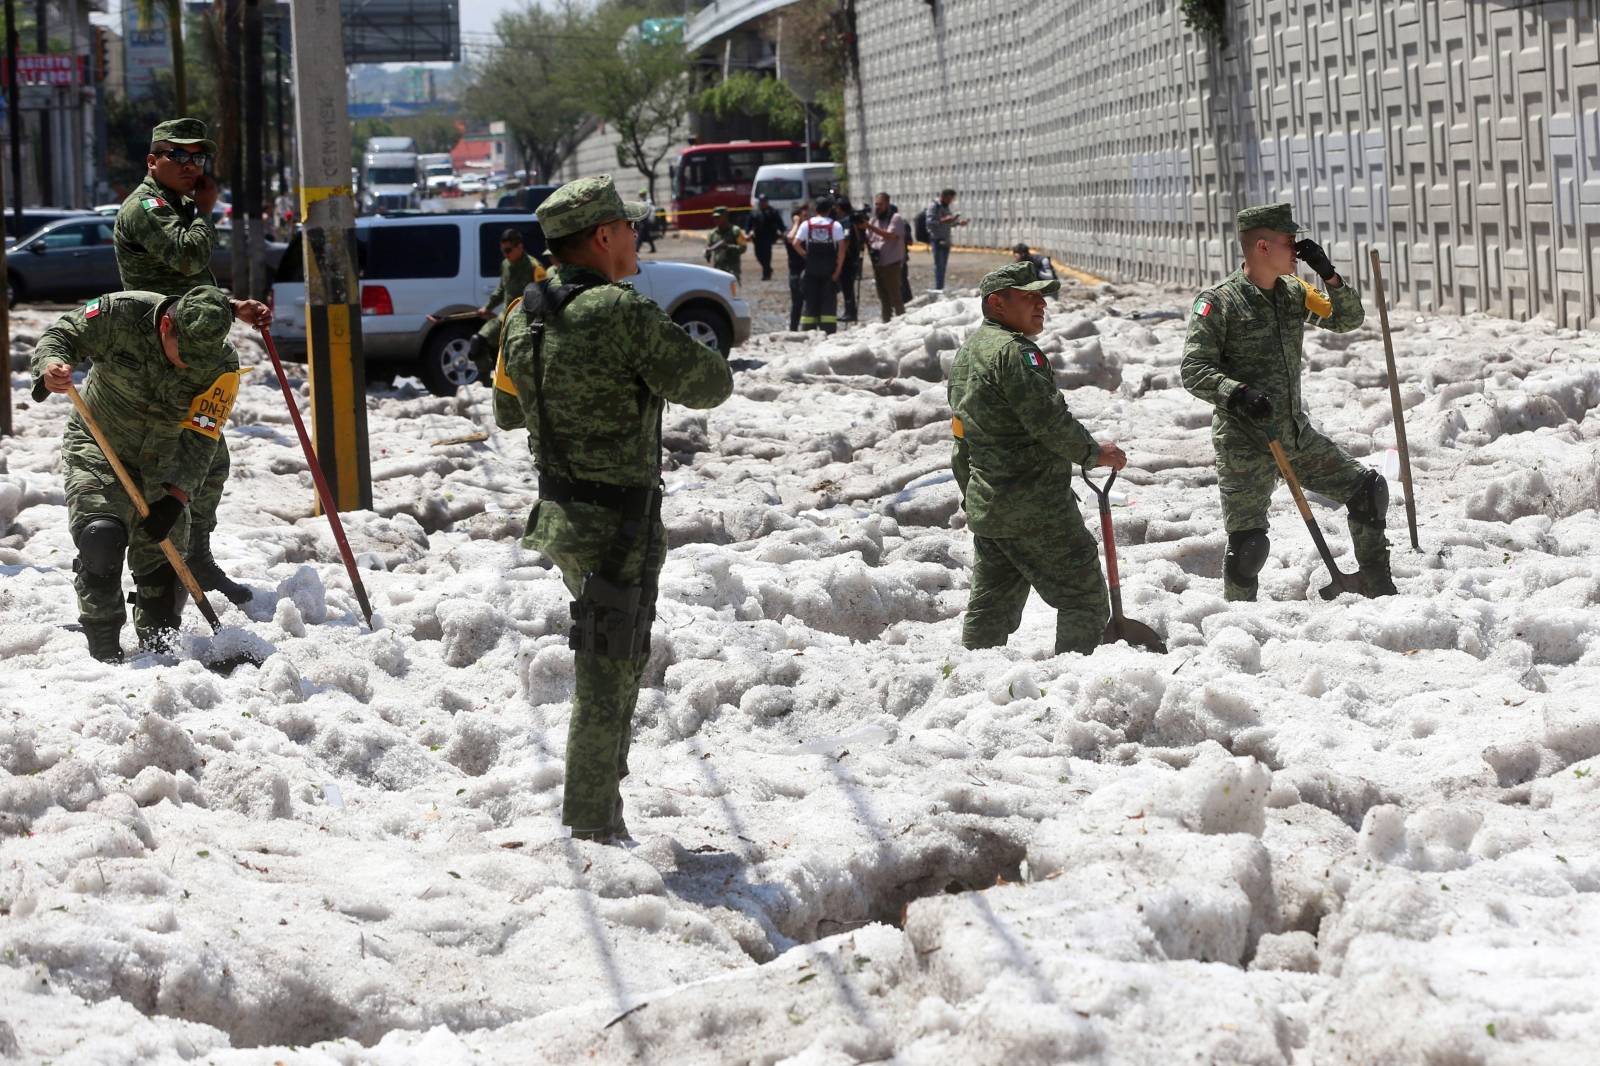 Soldiers try to clear away ice after a heavy storm of rain and hail which affected some areas of the city in ââGuadalajara